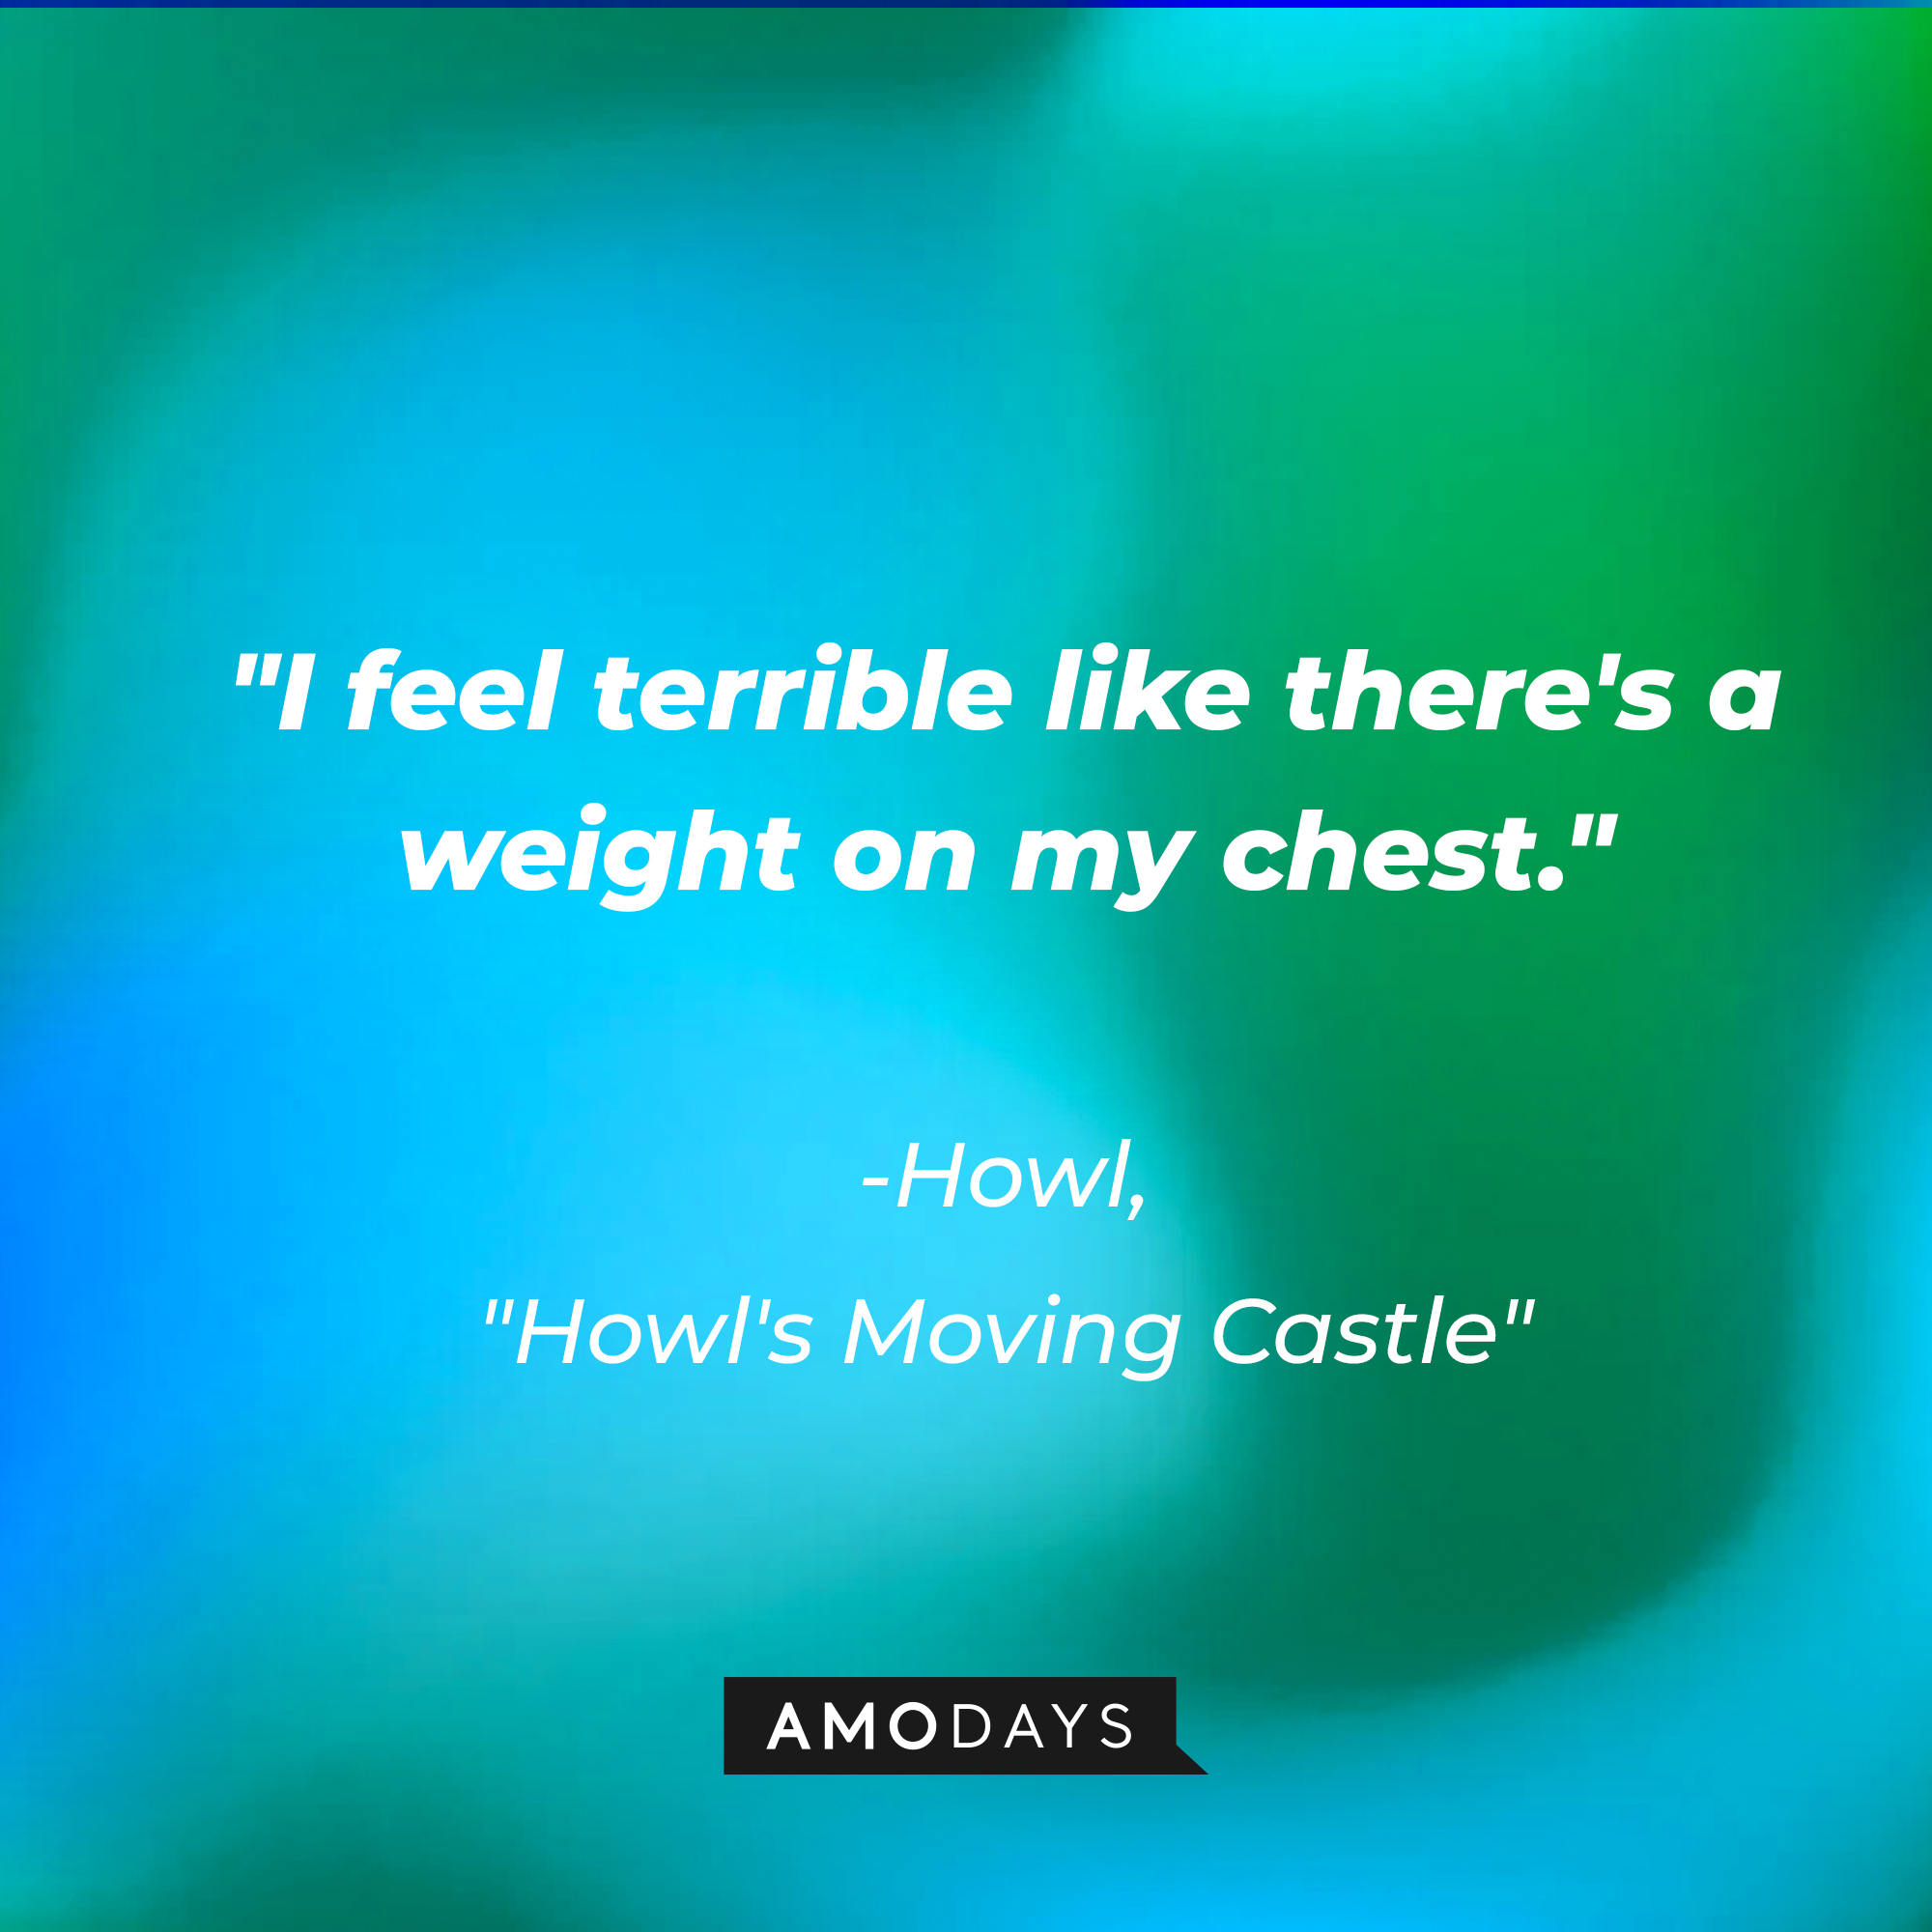 Howl's quote in "Howl's Moving Castle:" "I feel terrible like there's a weight on my chest." | Source: AmoDays